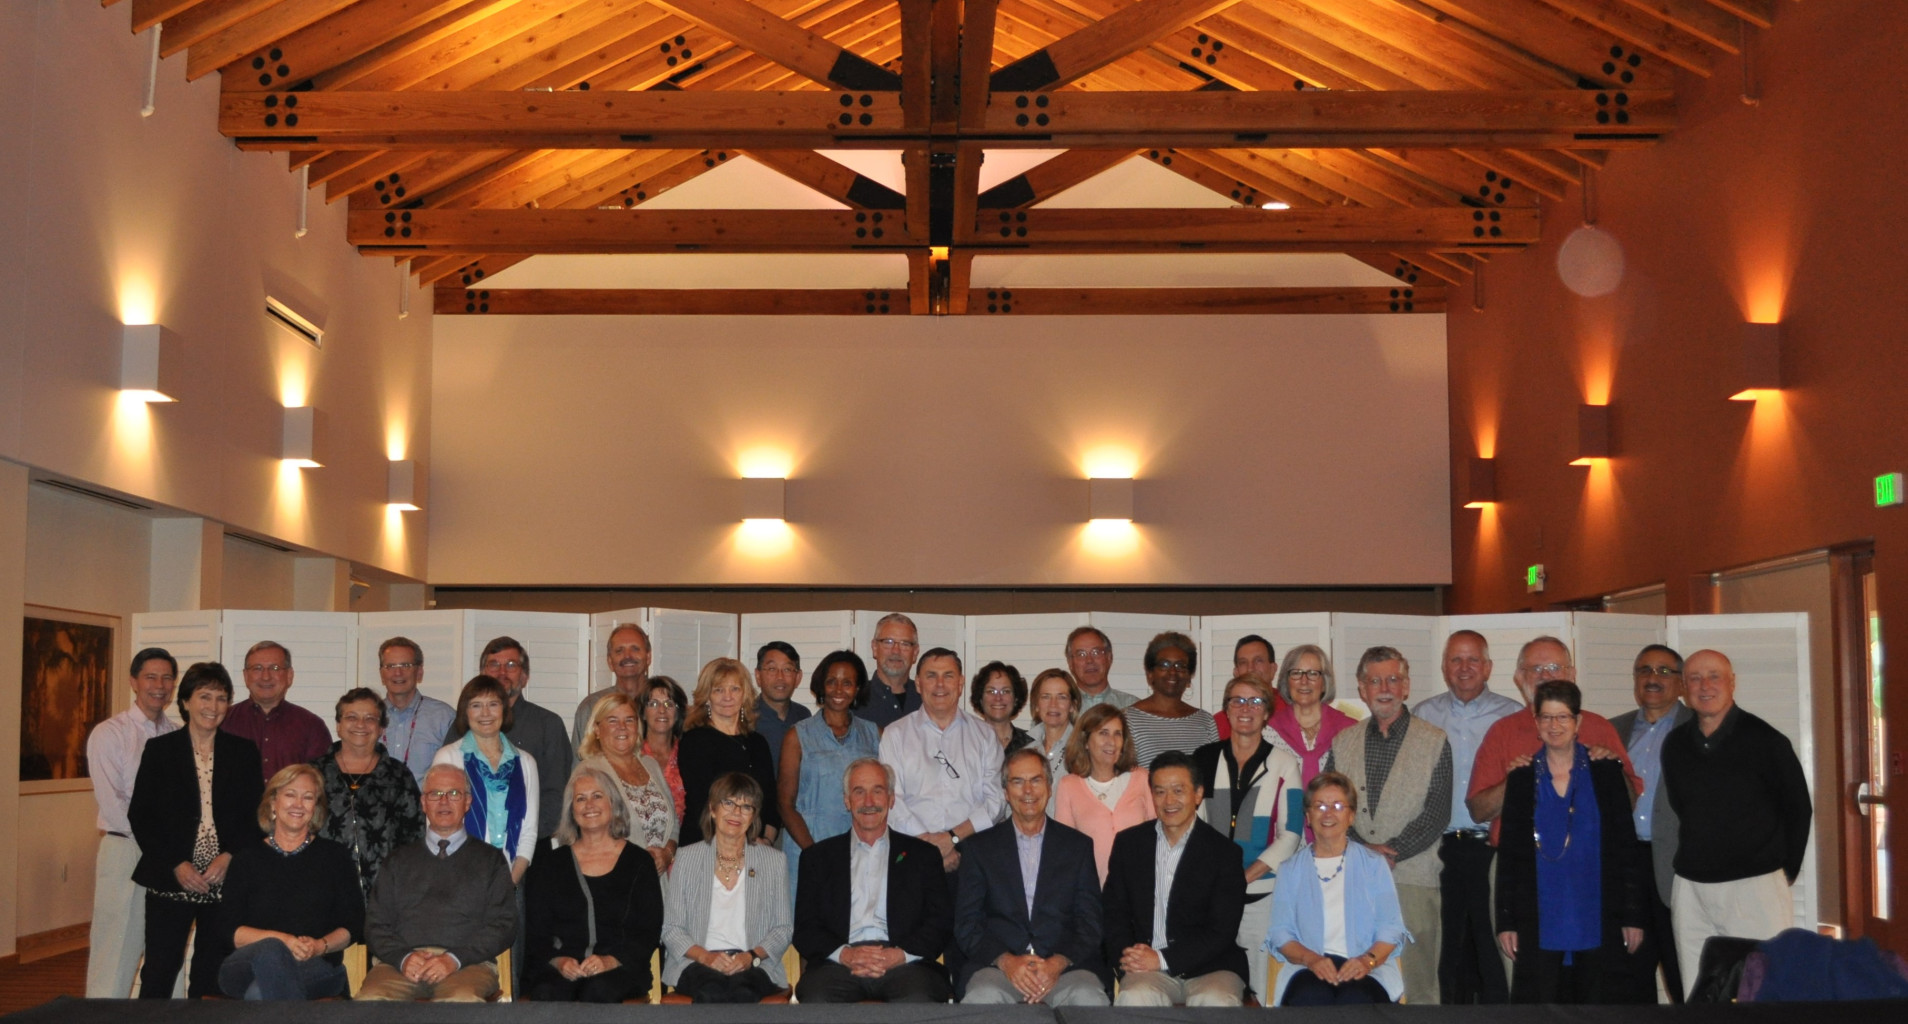 Project Redwood Partners at the October 2015 Annual Meeting